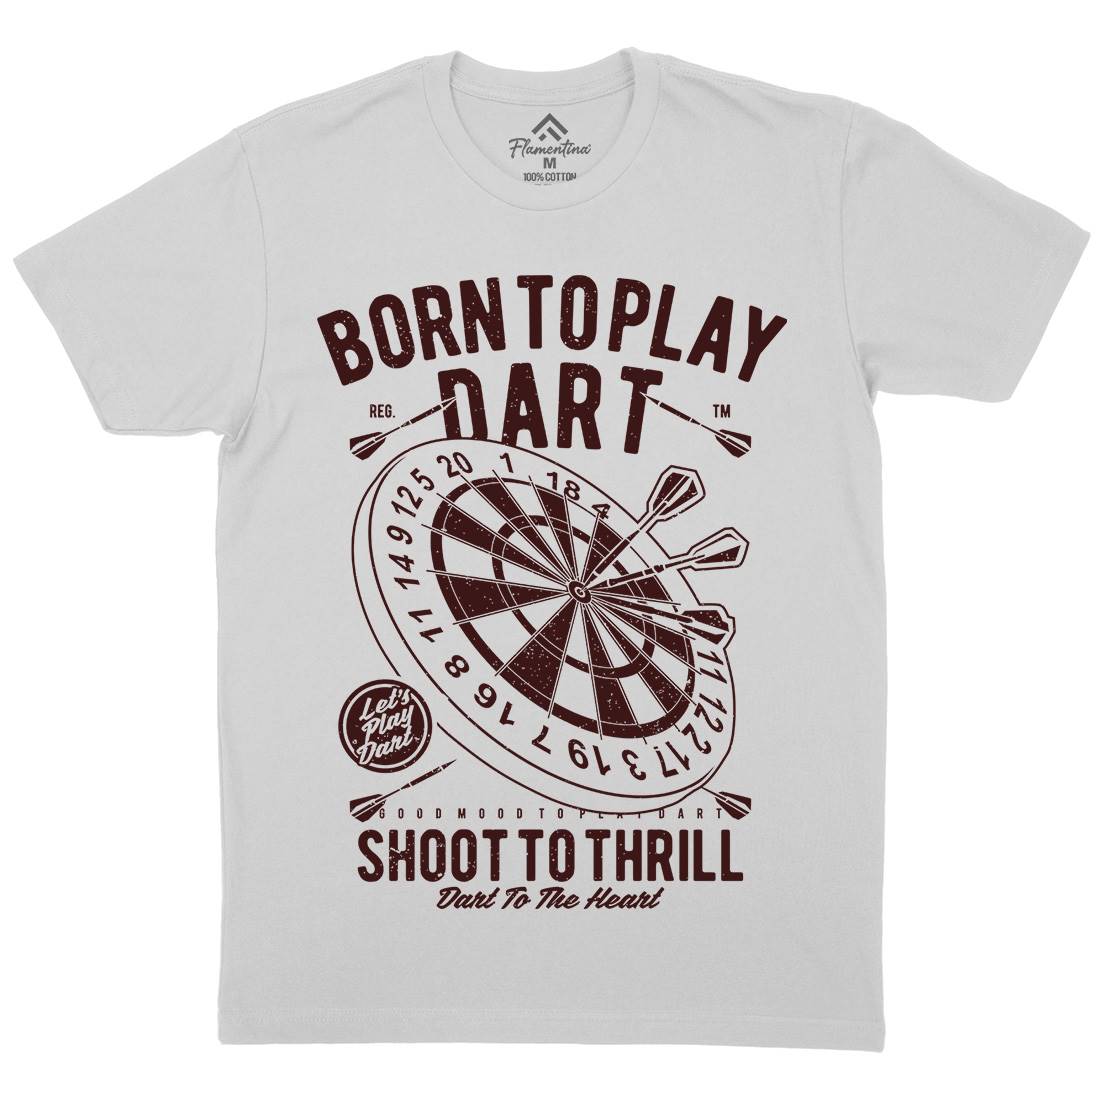 Born To Play Mens Crew Neck T-Shirt Sport A622